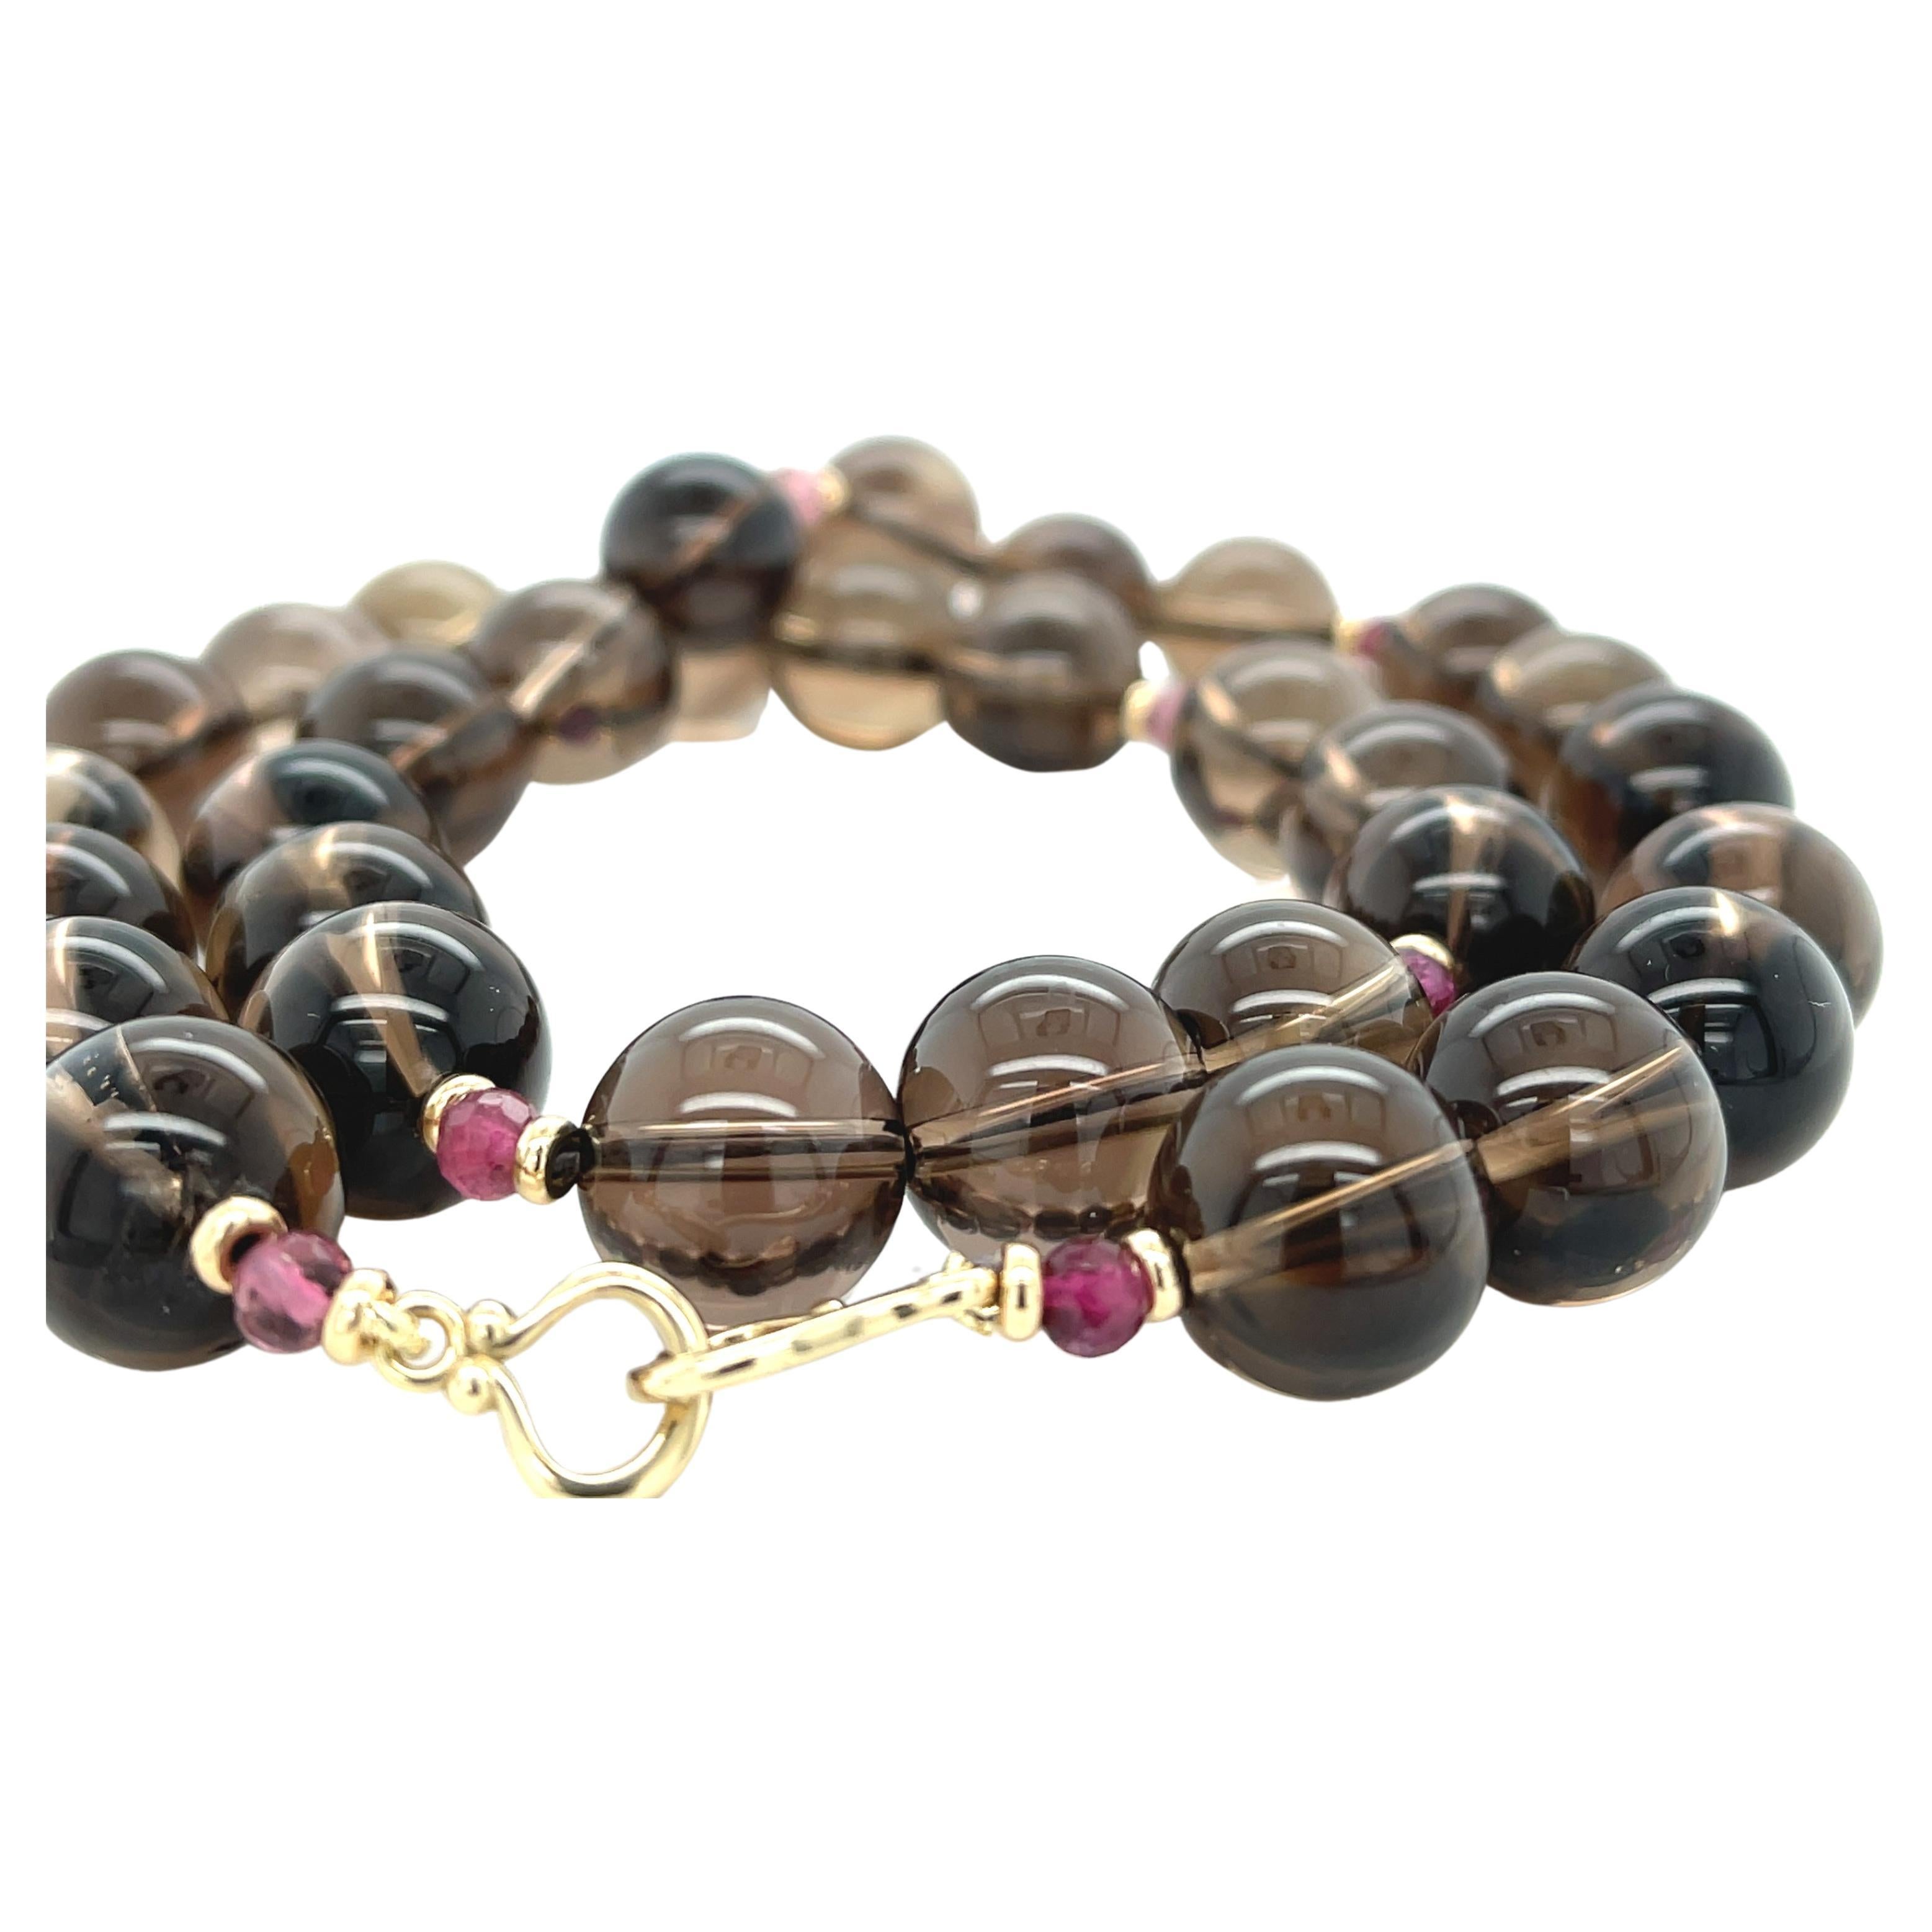 This strand of smoky quartz (commonly referred to as smoky topaz) and pink tourmaline beads is perfect for anyone who loves the warm, rich hues of coffee and chocolate! Beautifully matched 12mm round, transparent smoky topaz beads have been arranged